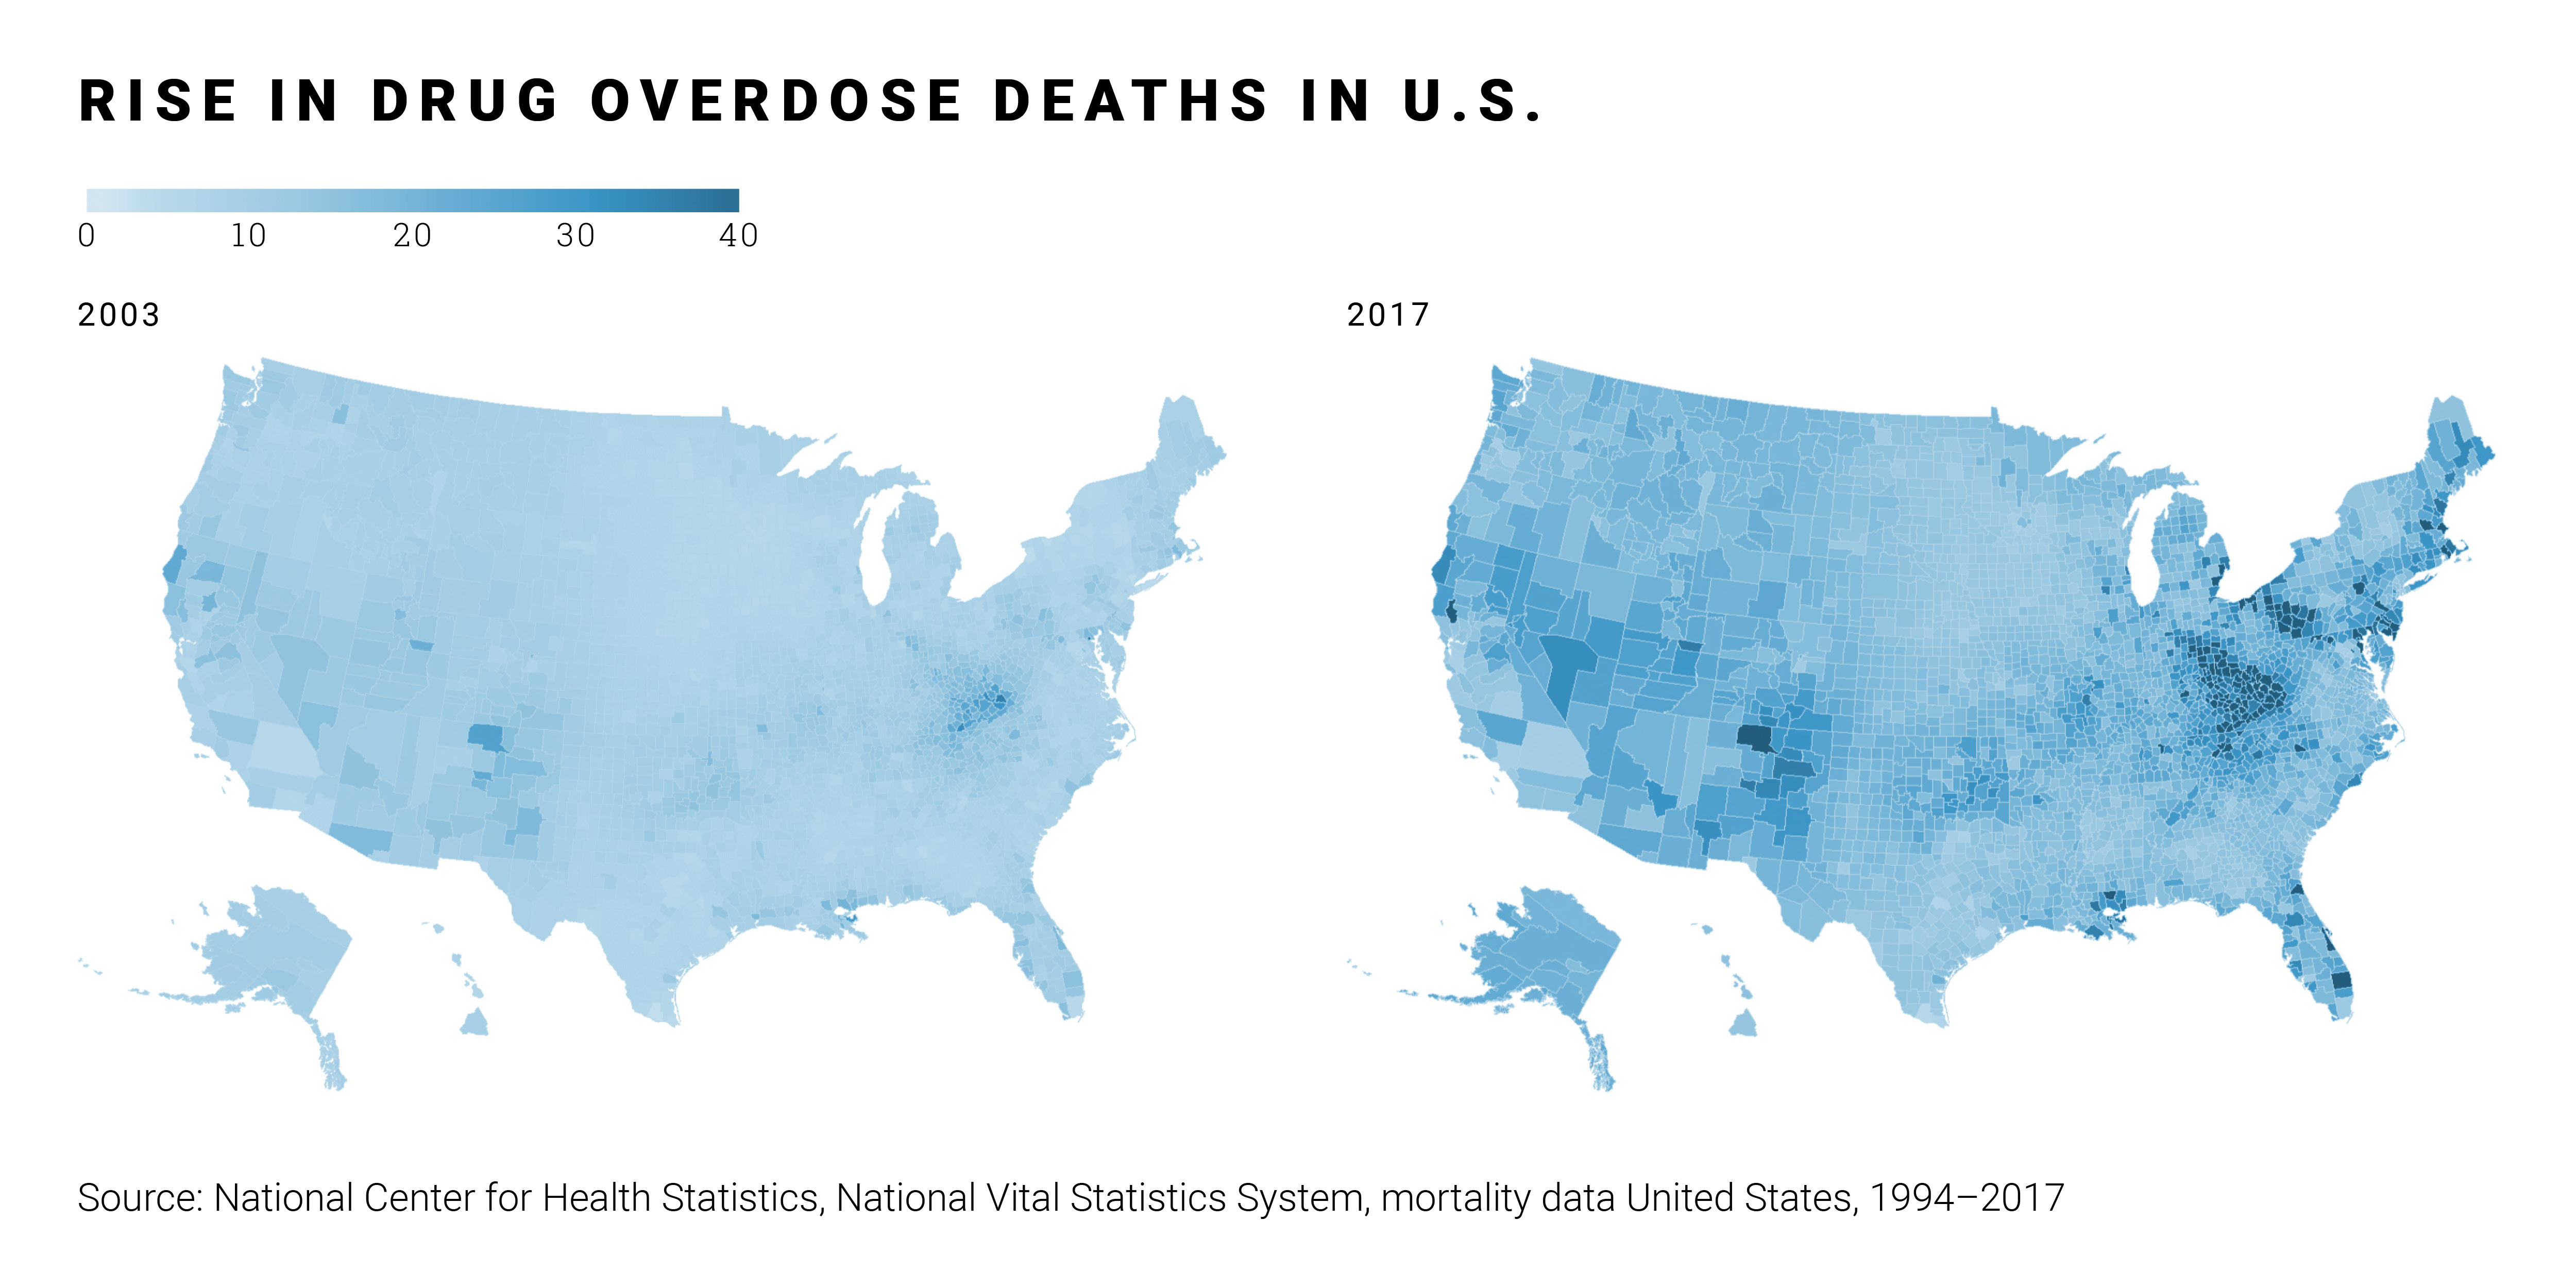 Map showing the rise in drug overdose deaths in the U.S. between 2003-2017